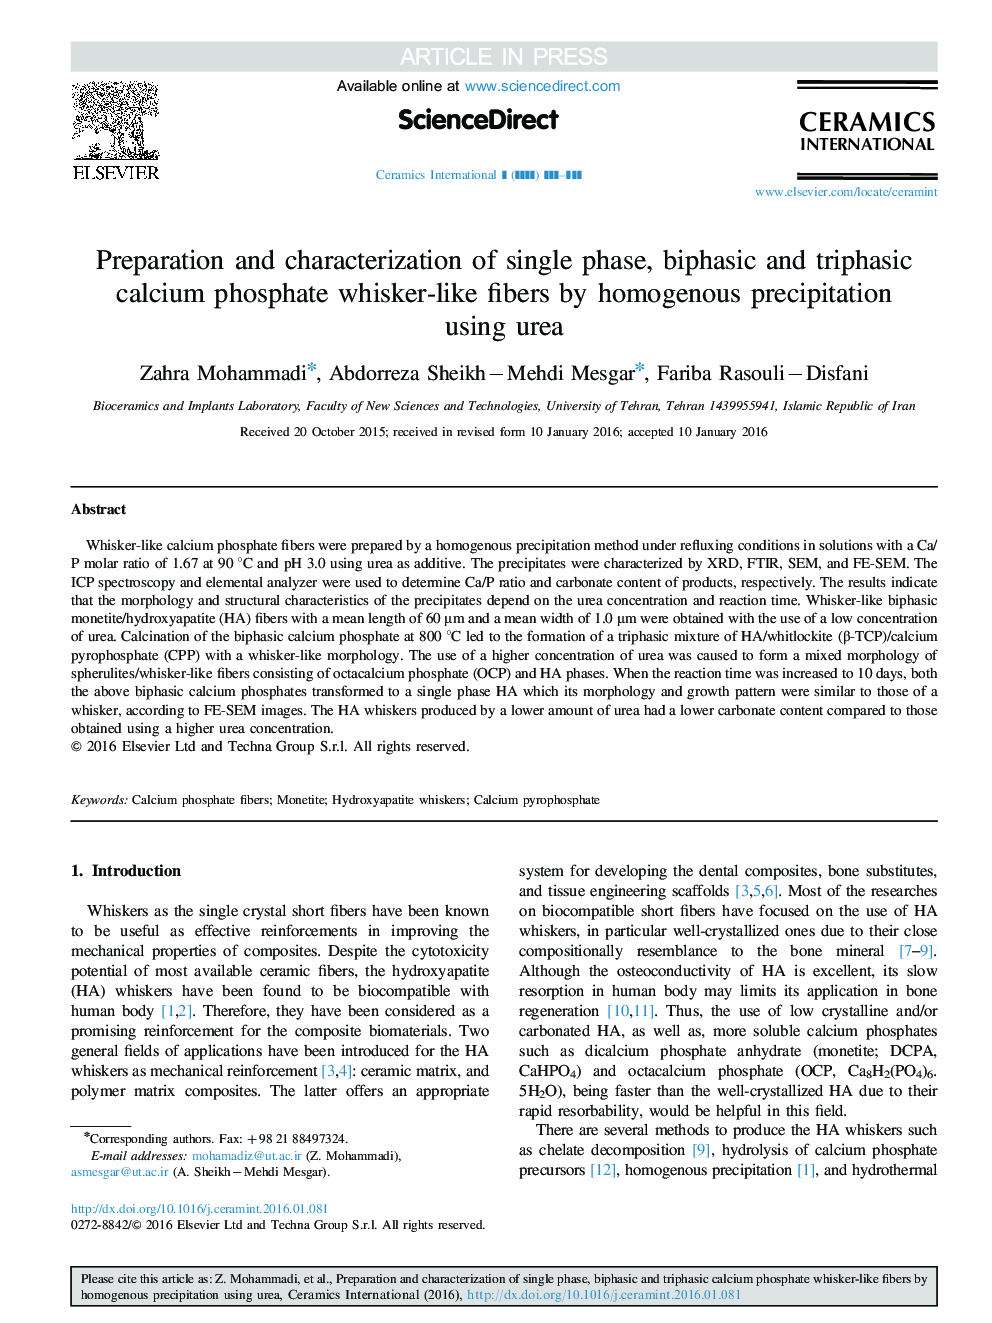 Preparation and characterization of single phase, biphasic and triphasic calcium phosphate whisker-like fibers by homogenous precipitation using urea